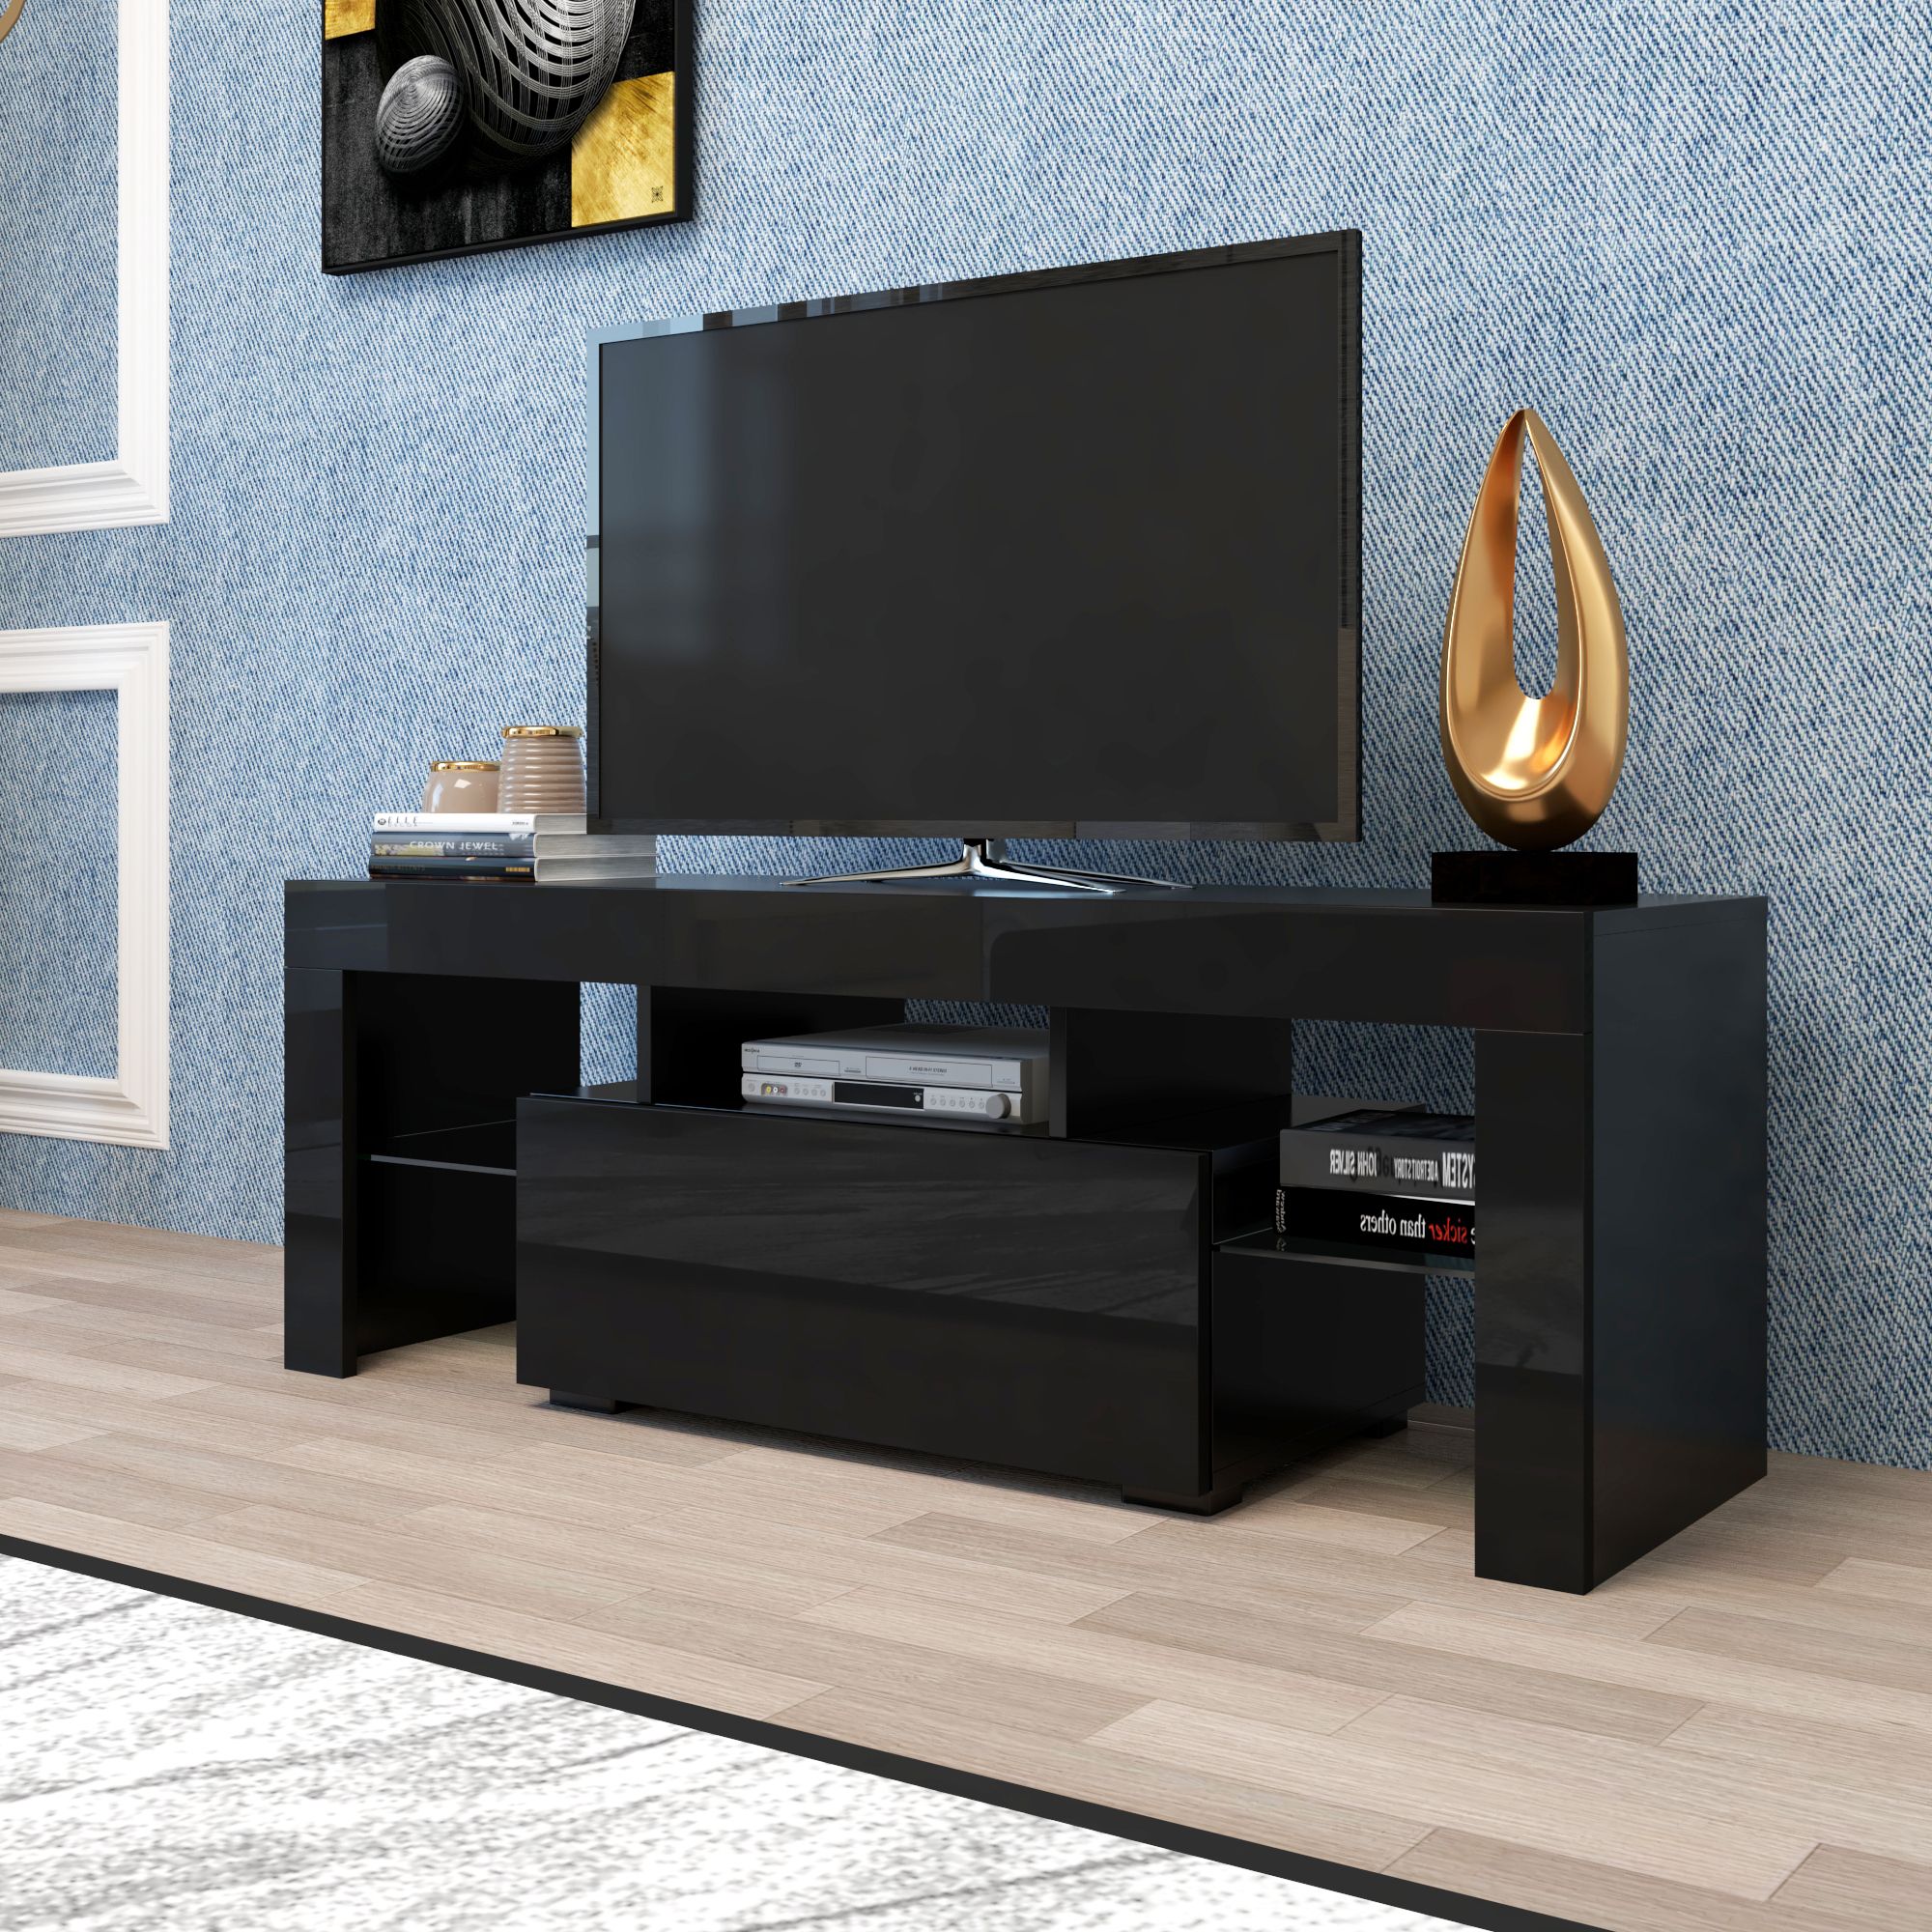 Entertainment Centers And Tv Stands, Yofe Tv Stand With With Regard To High Glass Modern Entertainment Tv Stands For Living Room Bedroom (View 5 of 15)